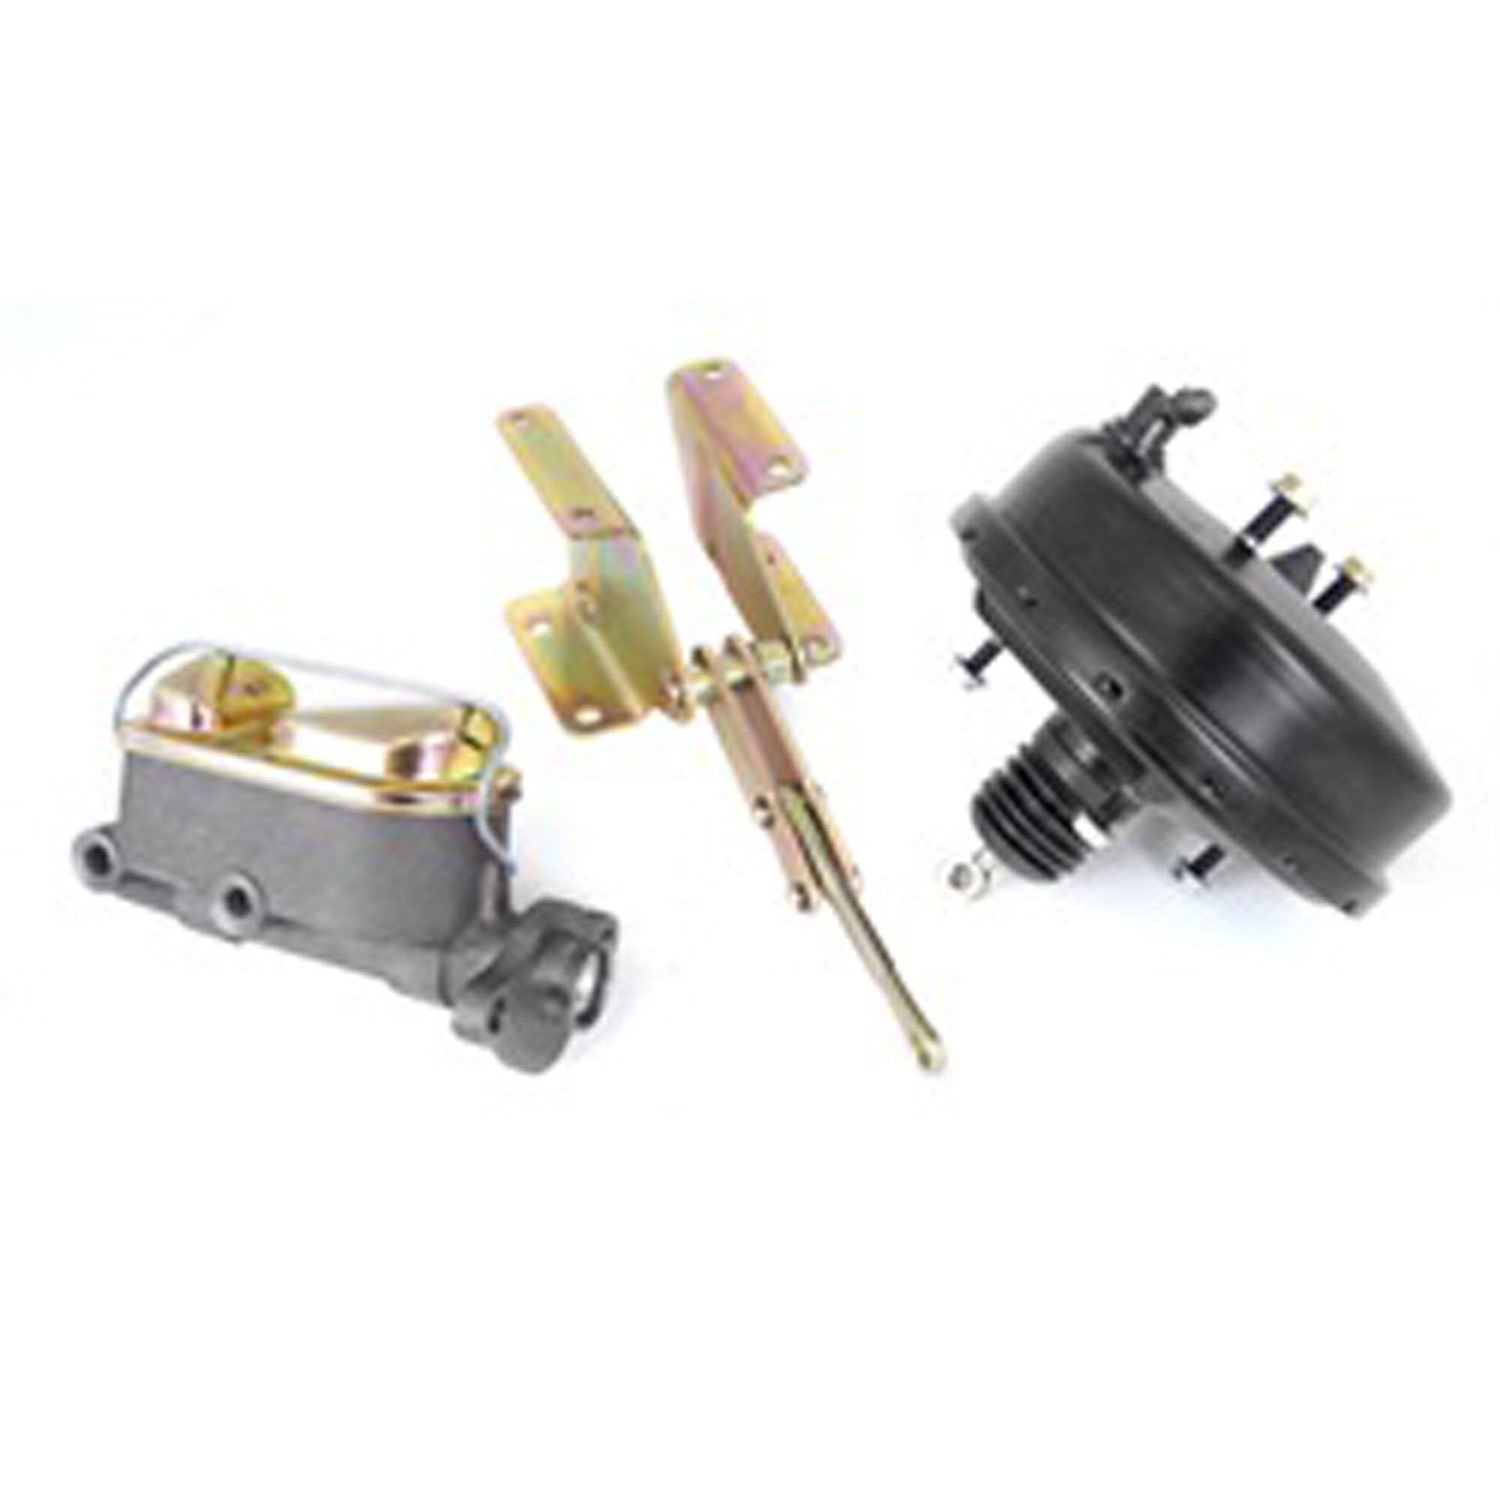 This power brake booster kit from Omix-ADA fits 76-78 Jeep CJ-5s and CJ-7s with 6-bolt brake calipers.